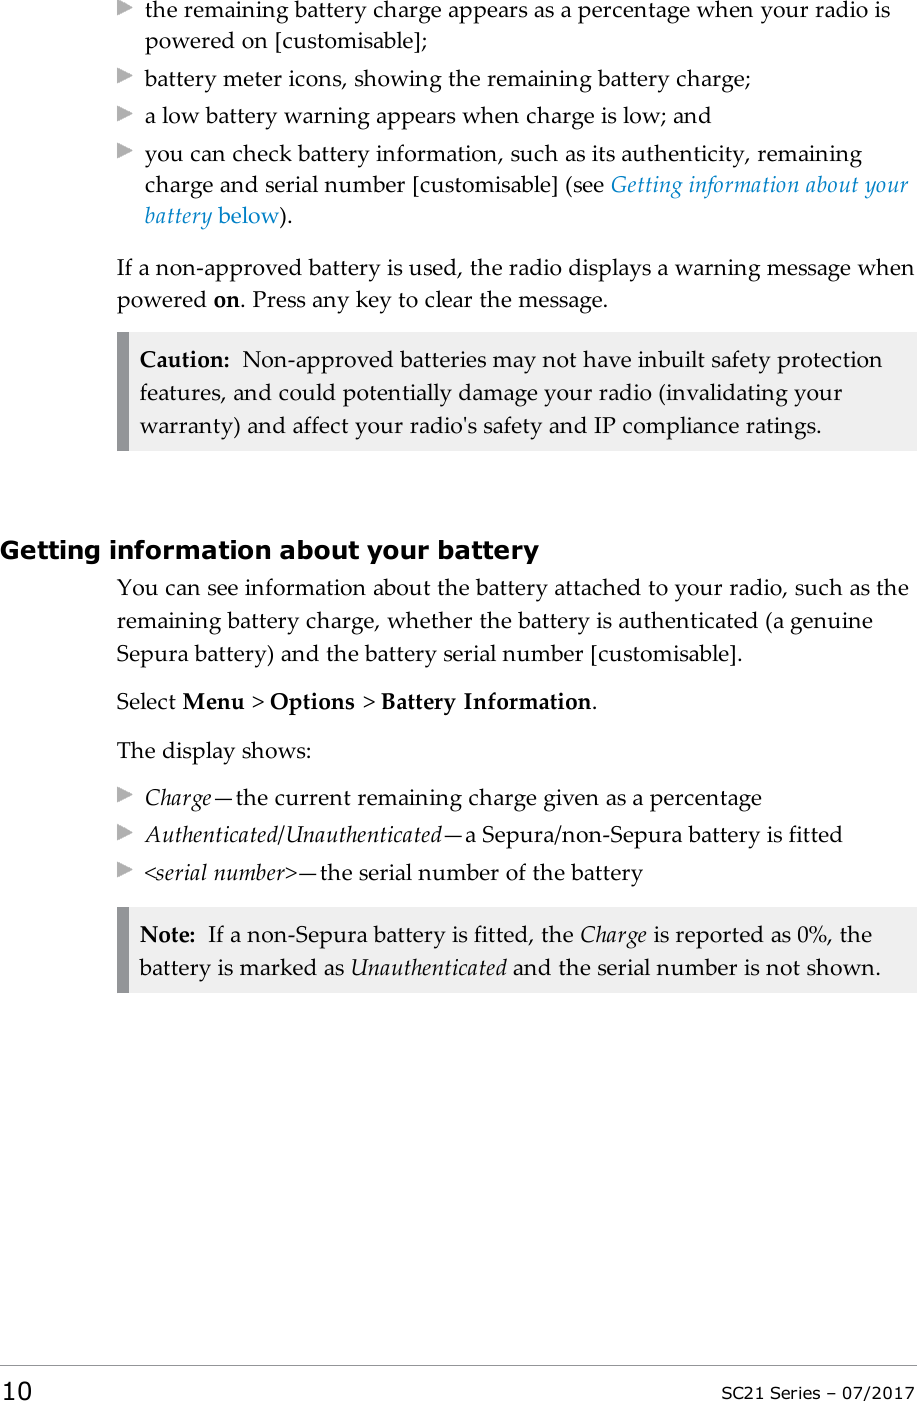 the remaining battery charge appears as a percentage when your radio ispowered on [customisable];battery meter icons, showing the remaining battery charge;a low battery warning appears when charge is low; andyou can check battery information, such as its authenticity, remainingcharge and serial number [customisable] (see Getting information about yourbattery below).If a non-approved battery is used, the radio displays a warning message whenpowered on. Press any key to clear the message.Caution: Non-approved batteries may not have inbuilt safety protectionfeatures, and could potentially damage your radio (invalidating yourwarranty) and affect your radio&apos;s safety and IP compliance ratings.Getting information about your batteryYou can see information about the battery attached to your radio, such as theremaining battery charge, whether the battery is authenticated (a genuineSepura battery) and the battery serial number [customisable].Select Menu &gt;Options &gt;Battery Information.The display shows:Charge—the current remaining charge given as a percentageAuthenticated/Unauthenticated—a Sepura/non-Sepura battery is fitted&lt;serial number&gt;—the serial number of the batteryNote: If a non-Sepura battery is fitted, the Charge is reported as 0%, thebattery is marked as Unauthenticated and the serial number is not shown.10 SC21 Series – 07/2017